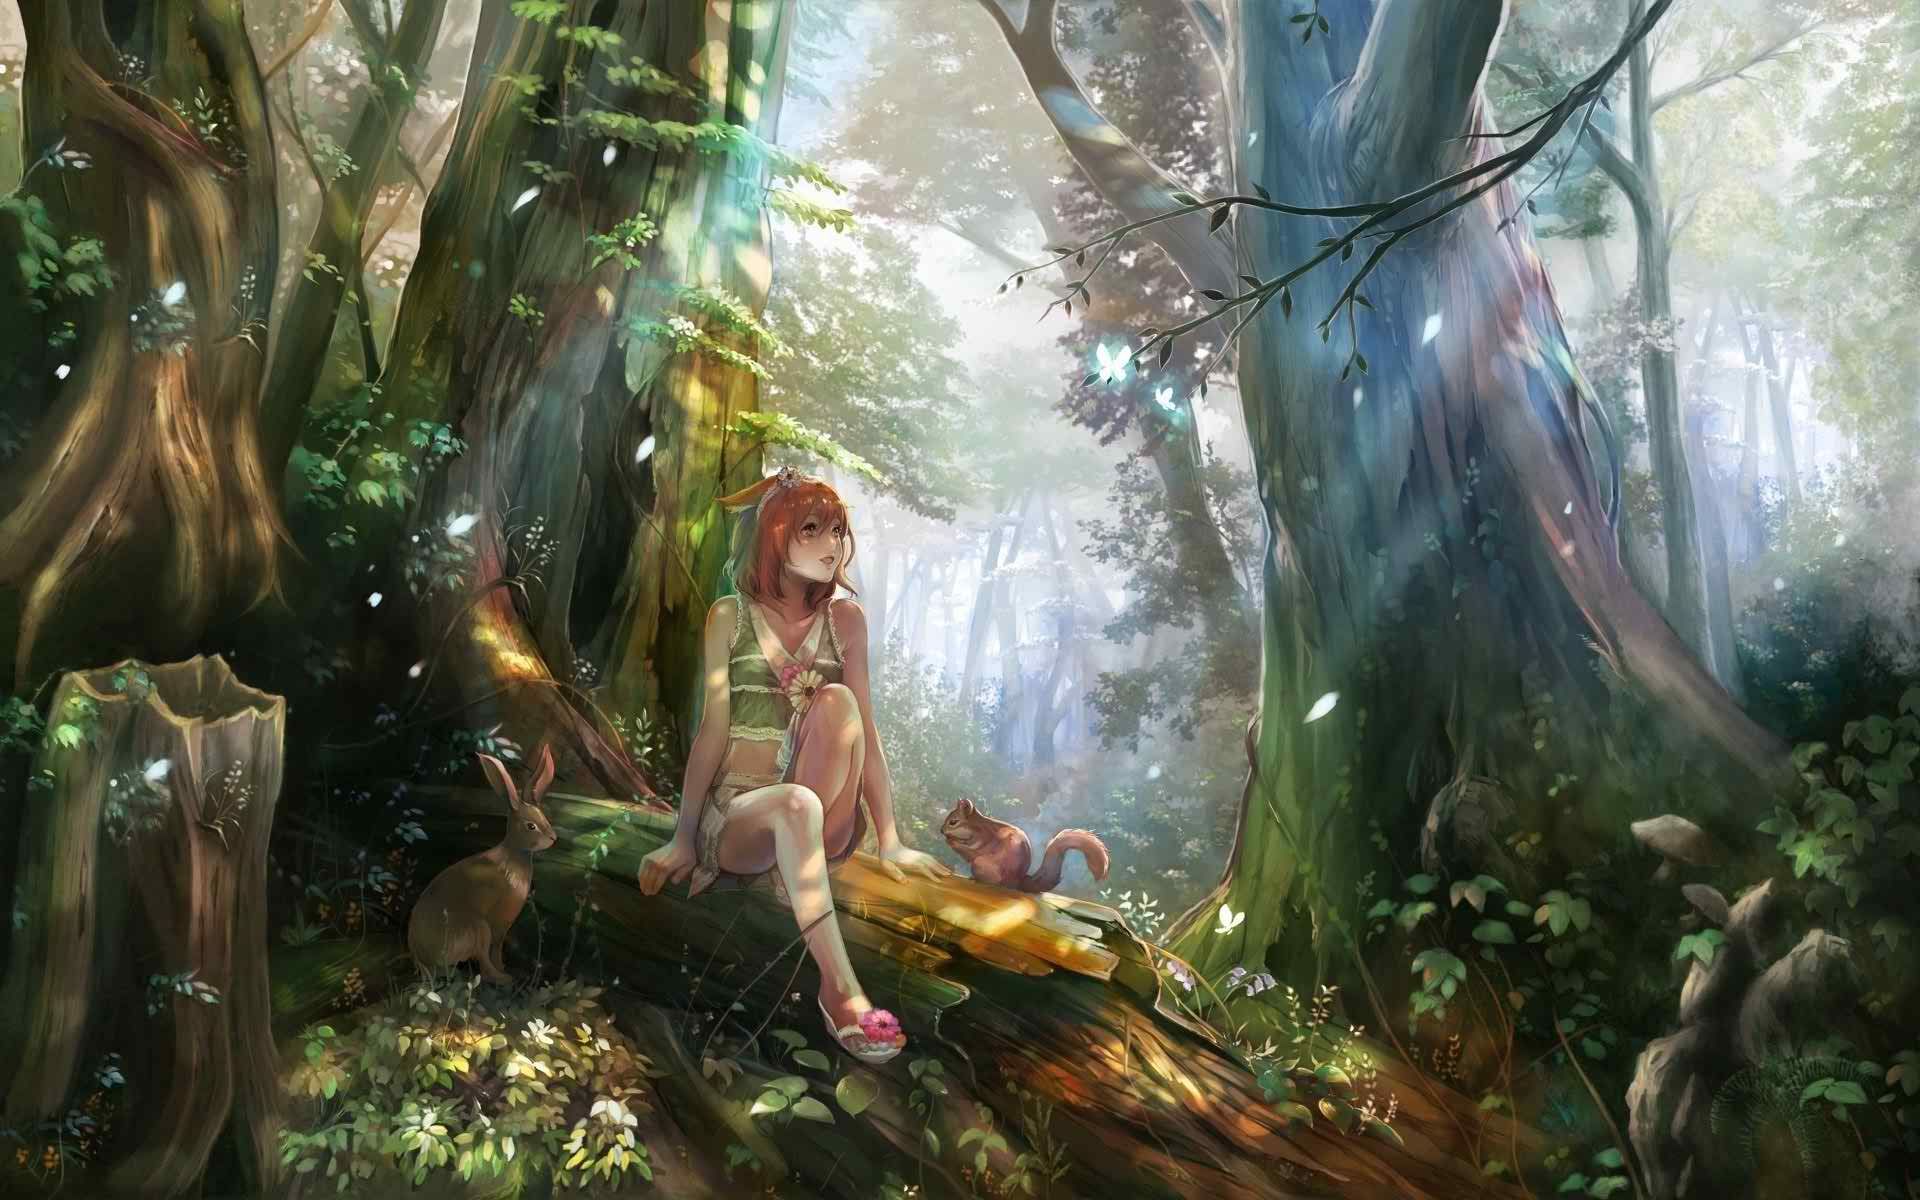 Pin by Na2sha   on Digital Fantasy art Magic forest Forest